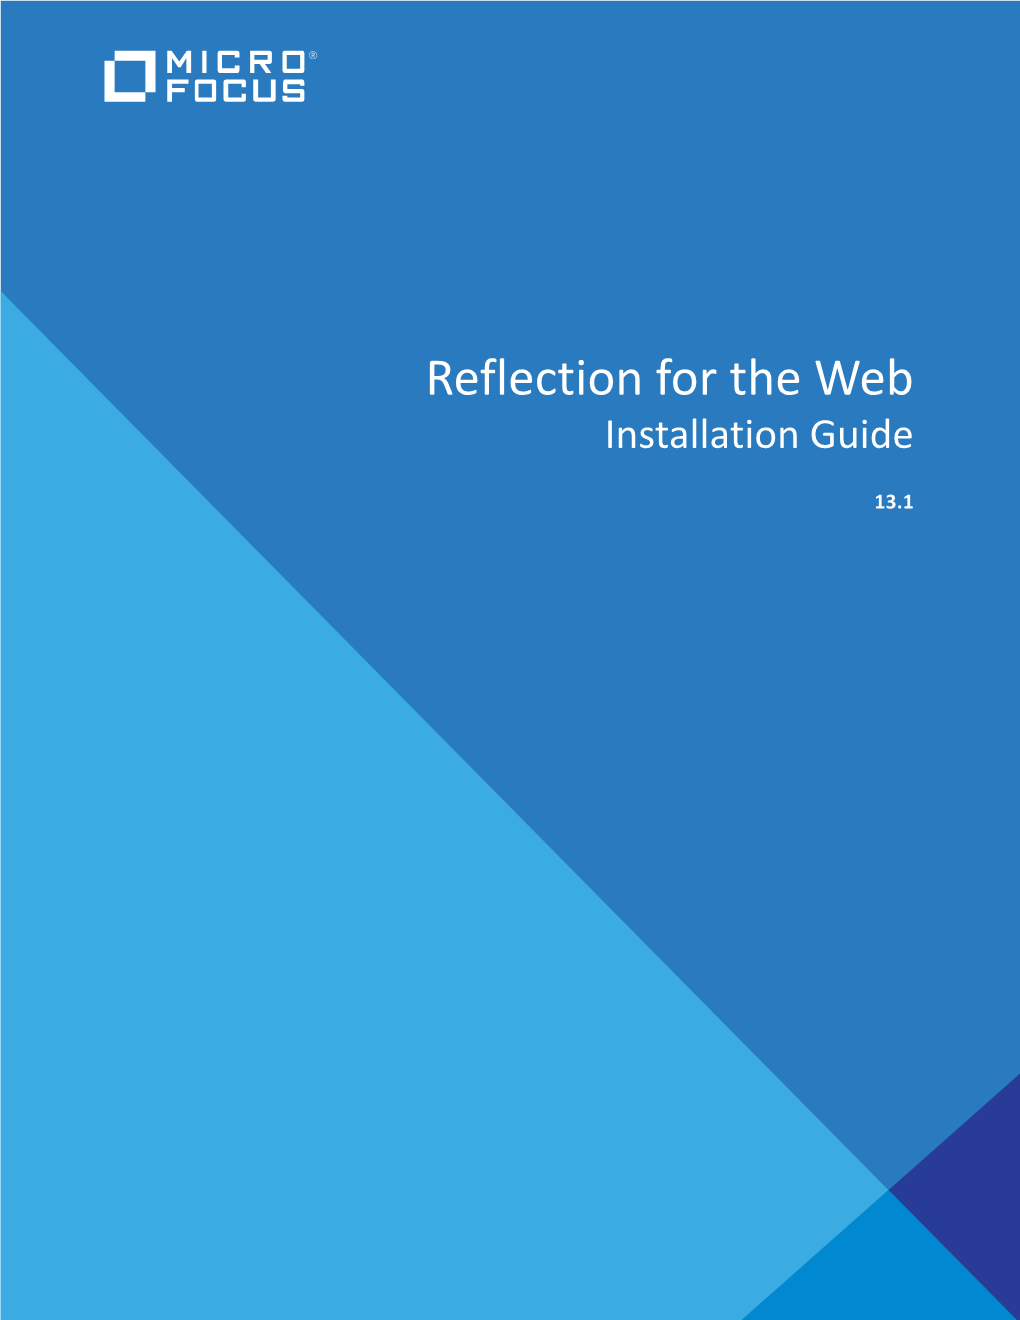 Reflection for the Web Installation Guide